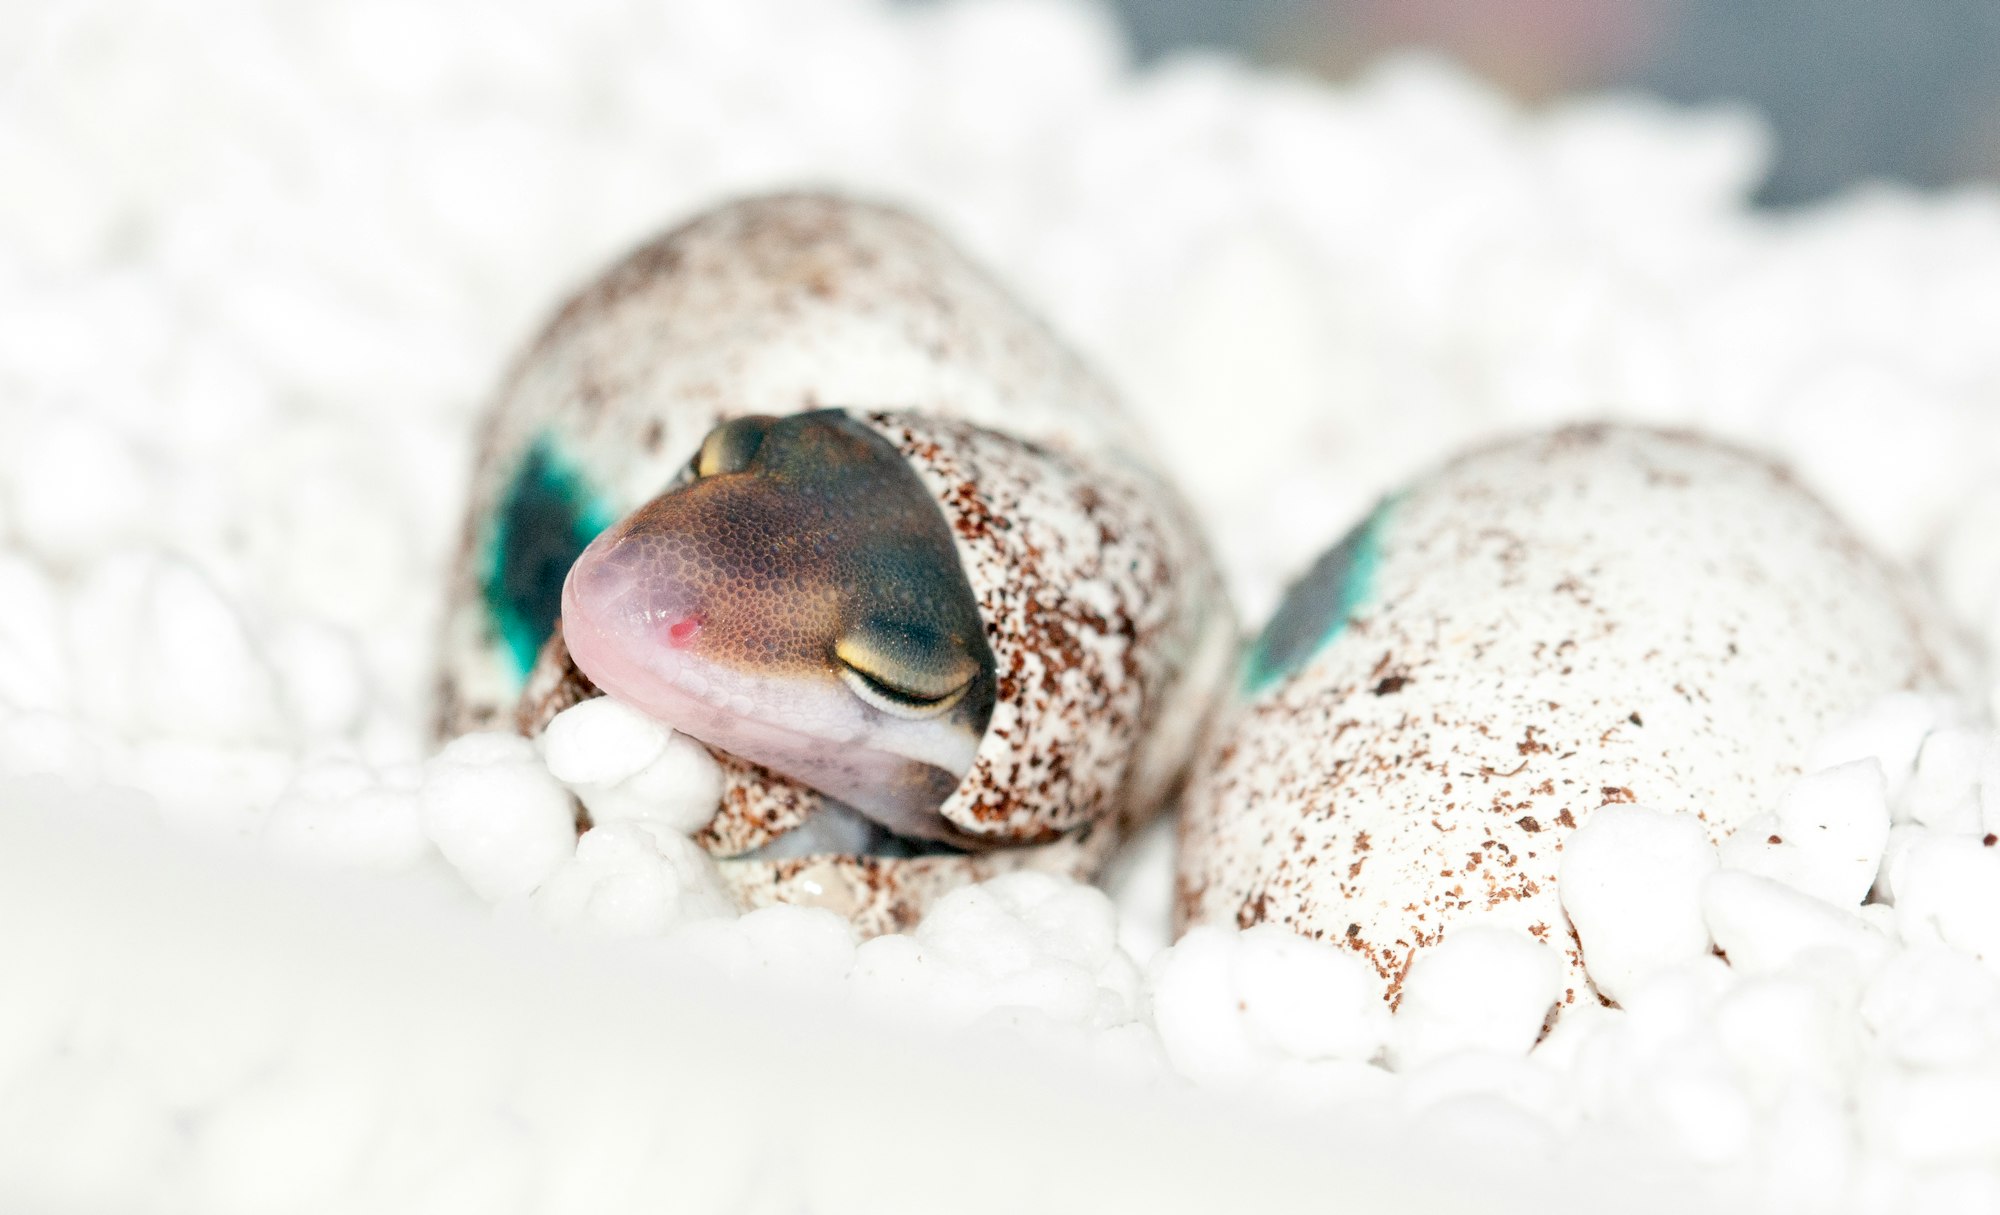 A couple of years ago I decided to get involved with breeding geckos to understand how their genetics worked (I then went on to create an online Leopard Gecko Genetics Calculator, called ReptiMate). One thing I wanted to capture was a gecko hatching, it took 16 eggs for me to finally be in the reptile room at the right time to see this little guy coming out of his egg. It took him about 10 minutes to get all the way out but he did and now lives a happy, healthy life with a friend :)